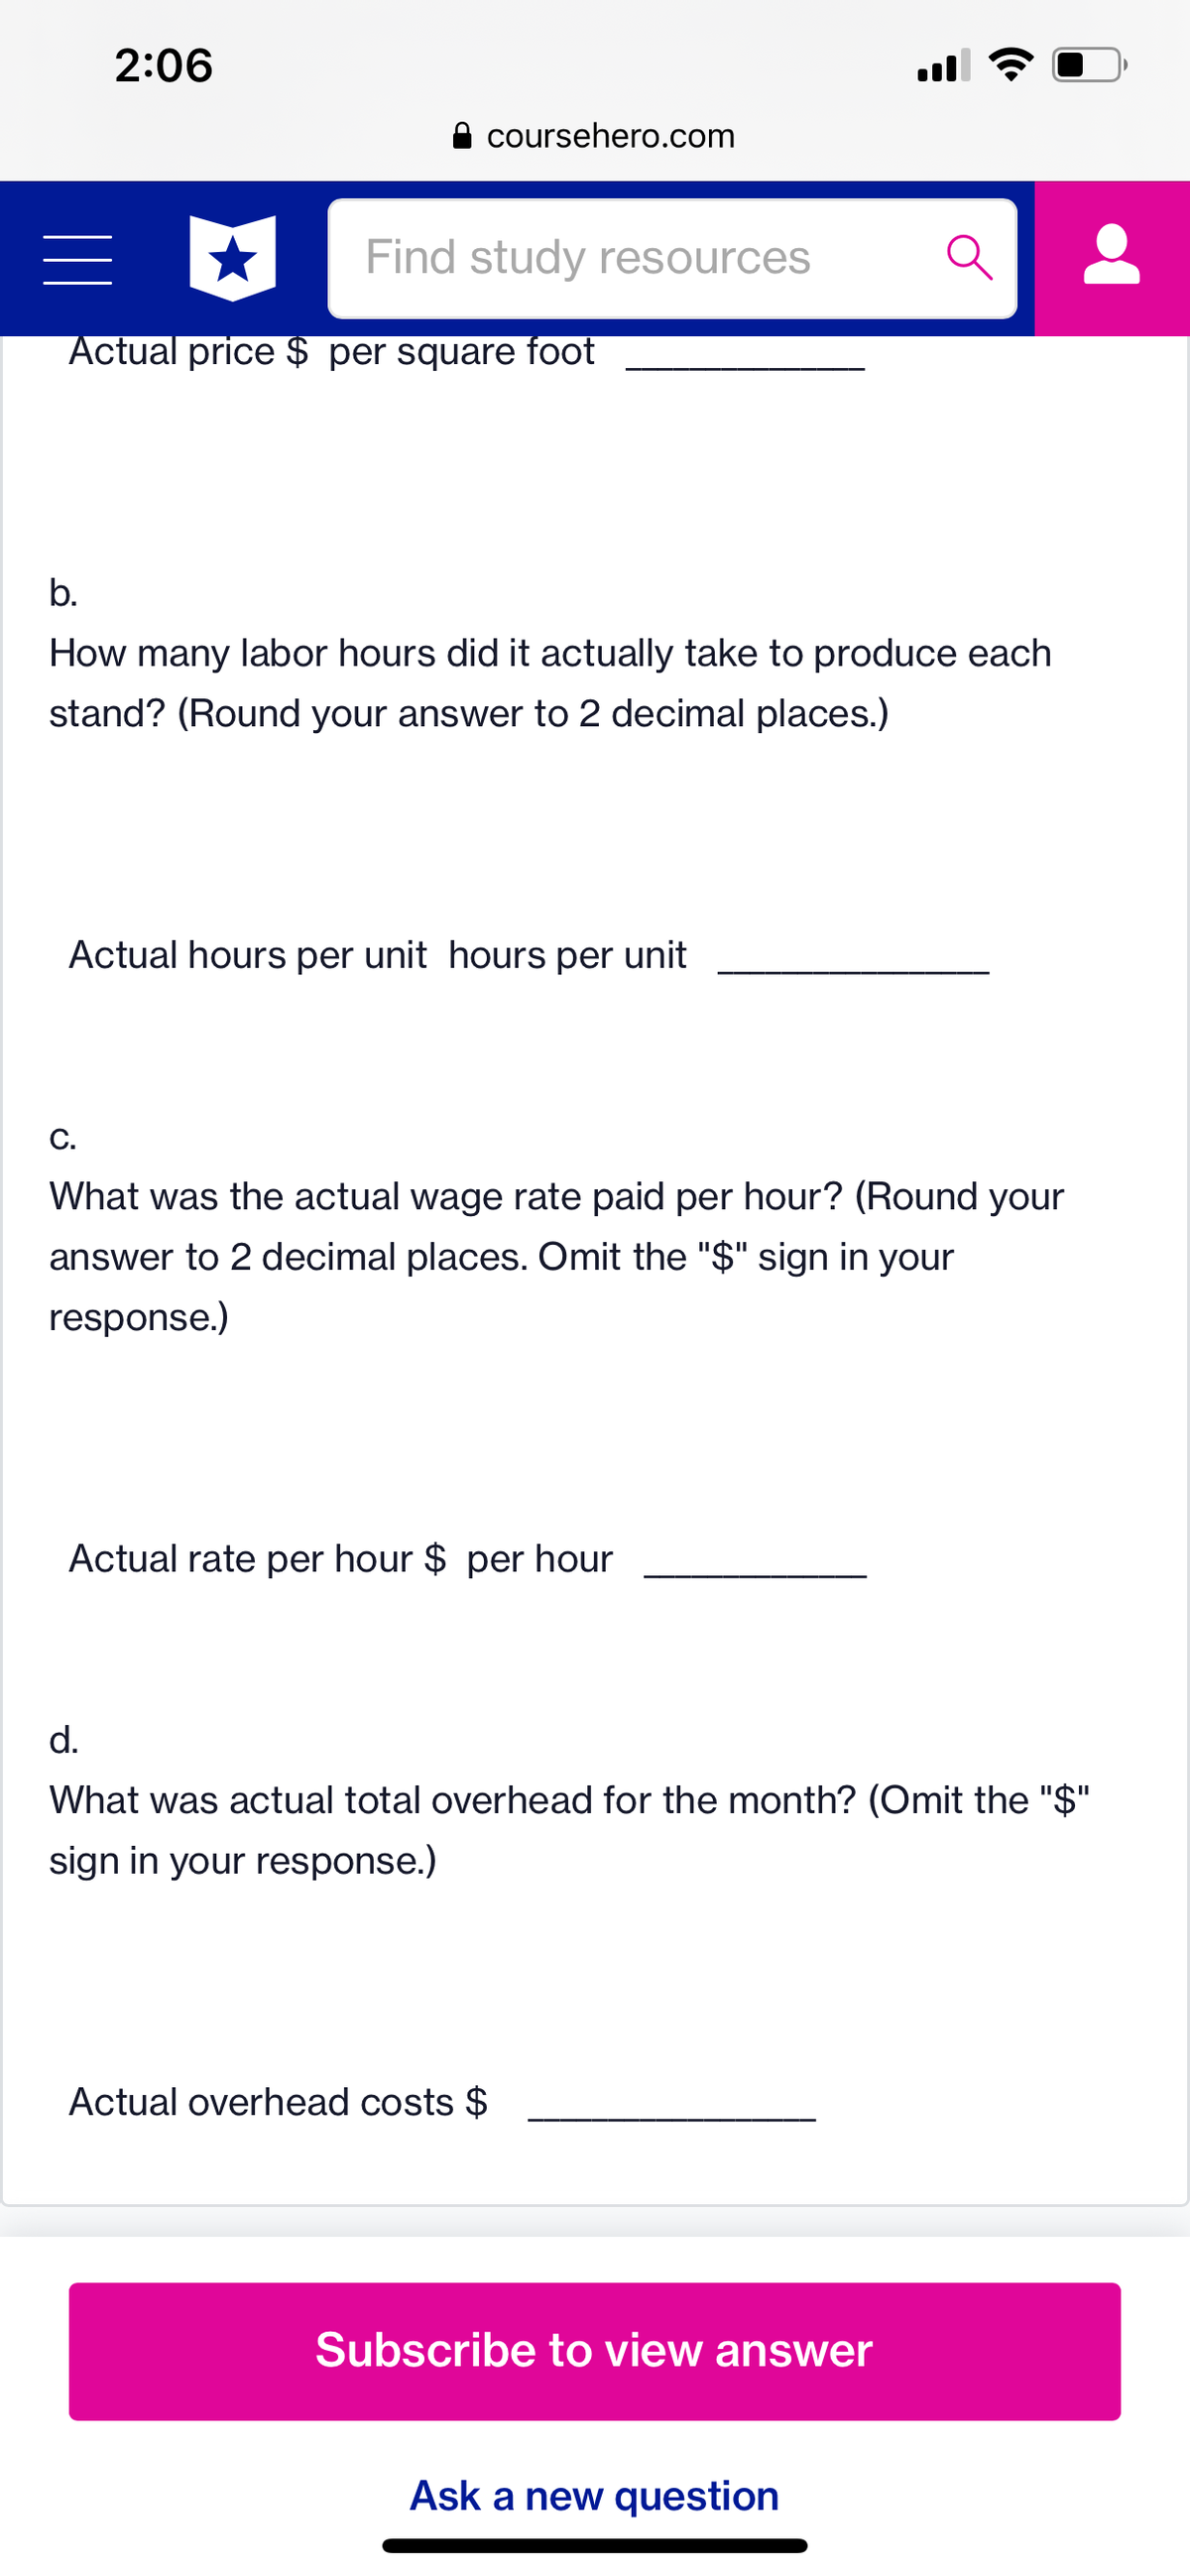 2:06
coursehero.com
Find study resources
Actual price $ per square foot
b.
How many labor hours did it actually take to produce each
stand? (Round your answer to 2 decimal places.)
Actual hours per unit hours per unit
C.
What was the actual wage rate paid per hour? (Round your
answer to 2 decimal places. Omit the "$" sign in your
response.)
Actual rate per hour $ per hour
d.
What was actual total overhead for the month? (Omit the "$"
sign in your response.)
Actual overhead costs $
Subscribe to view answer
Ask a new question
